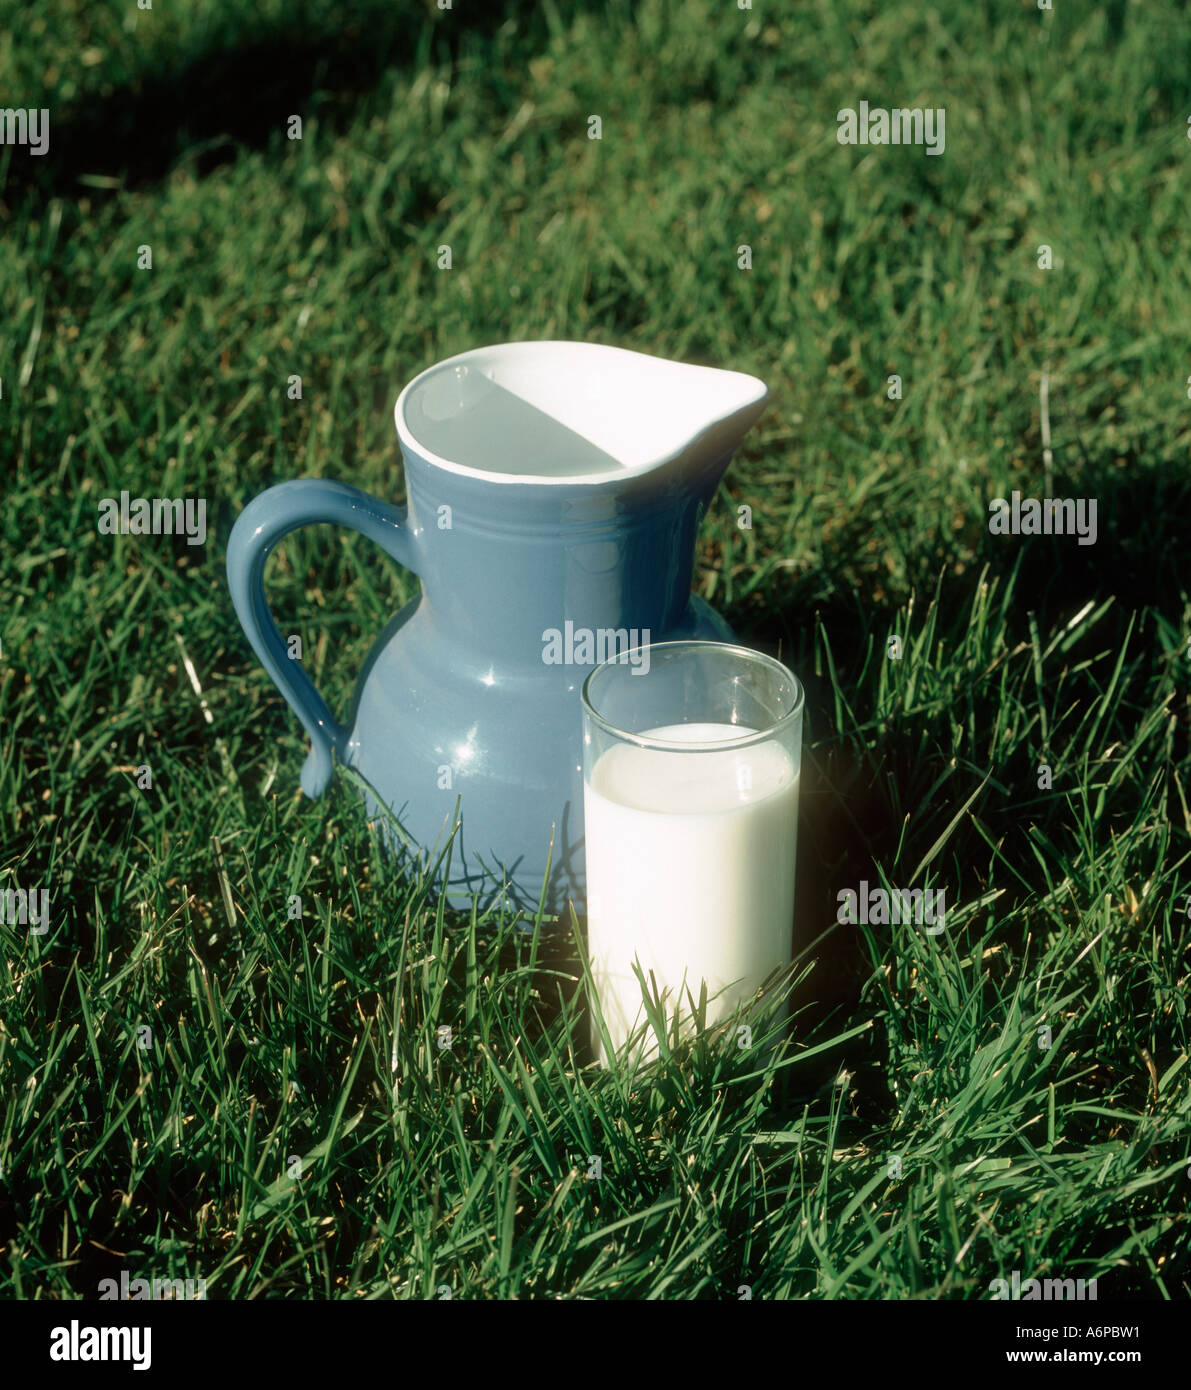 A glass of milk and a blue white jug standing in grass pasture Stock Photo